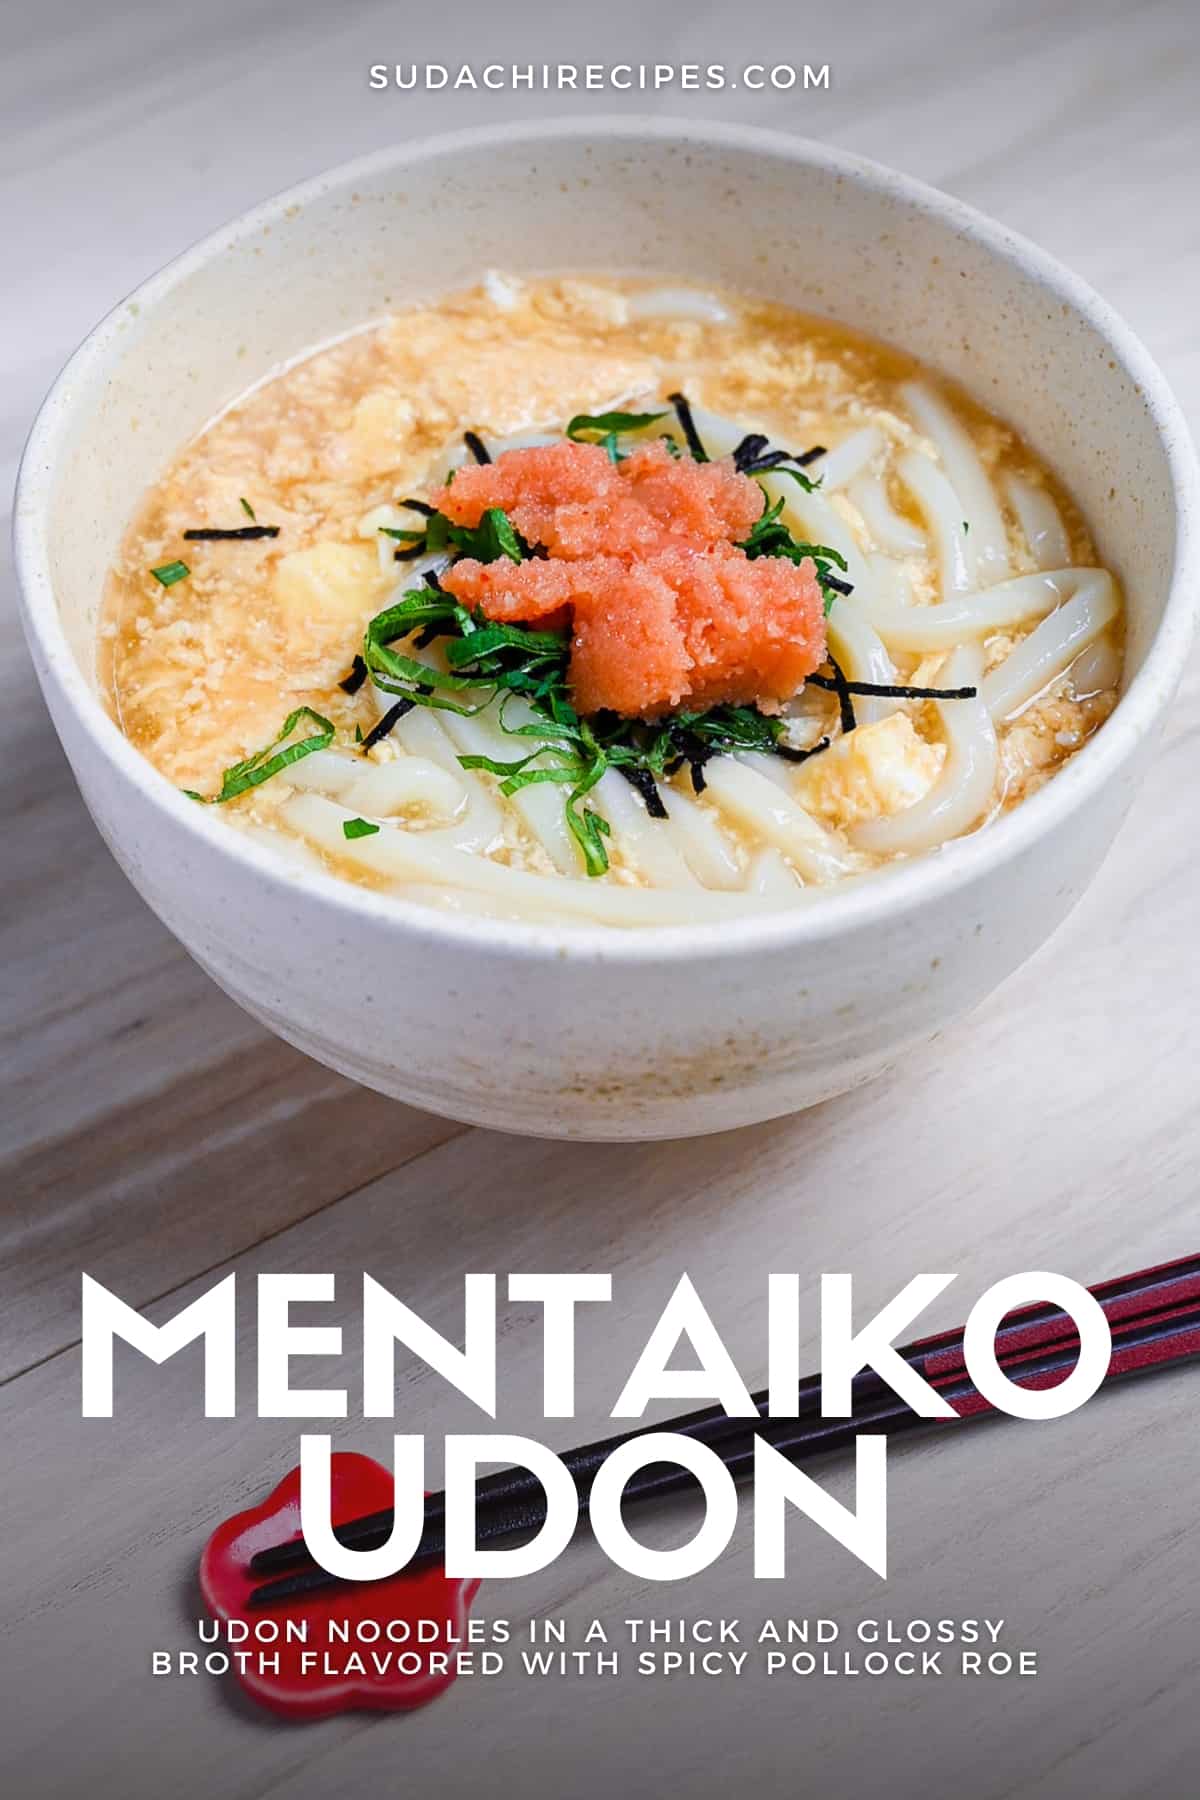 Mentaiko ankake udon served in a cream bowl and topped with shiso leaves. pin image